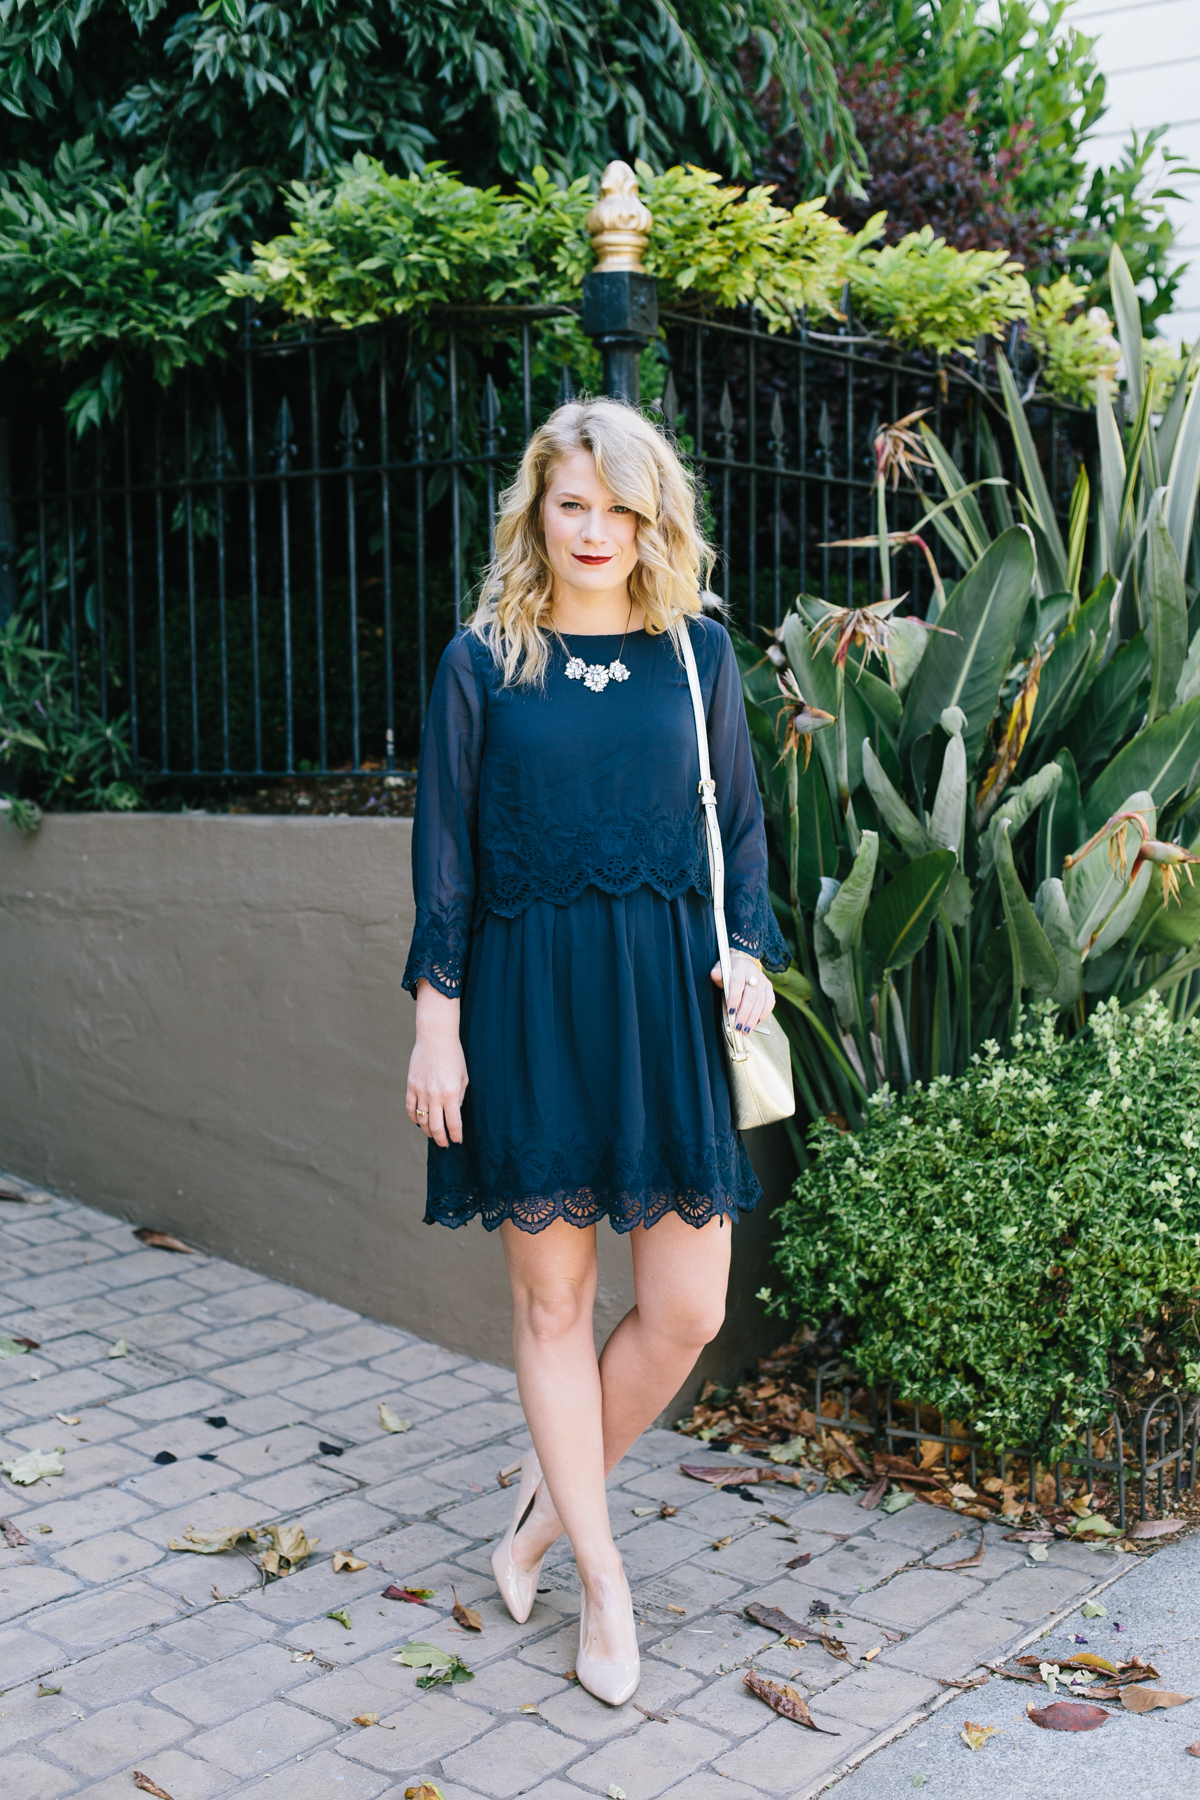 Double Layered Navy Dress from ASOS with Gold Kate Spade Bag.